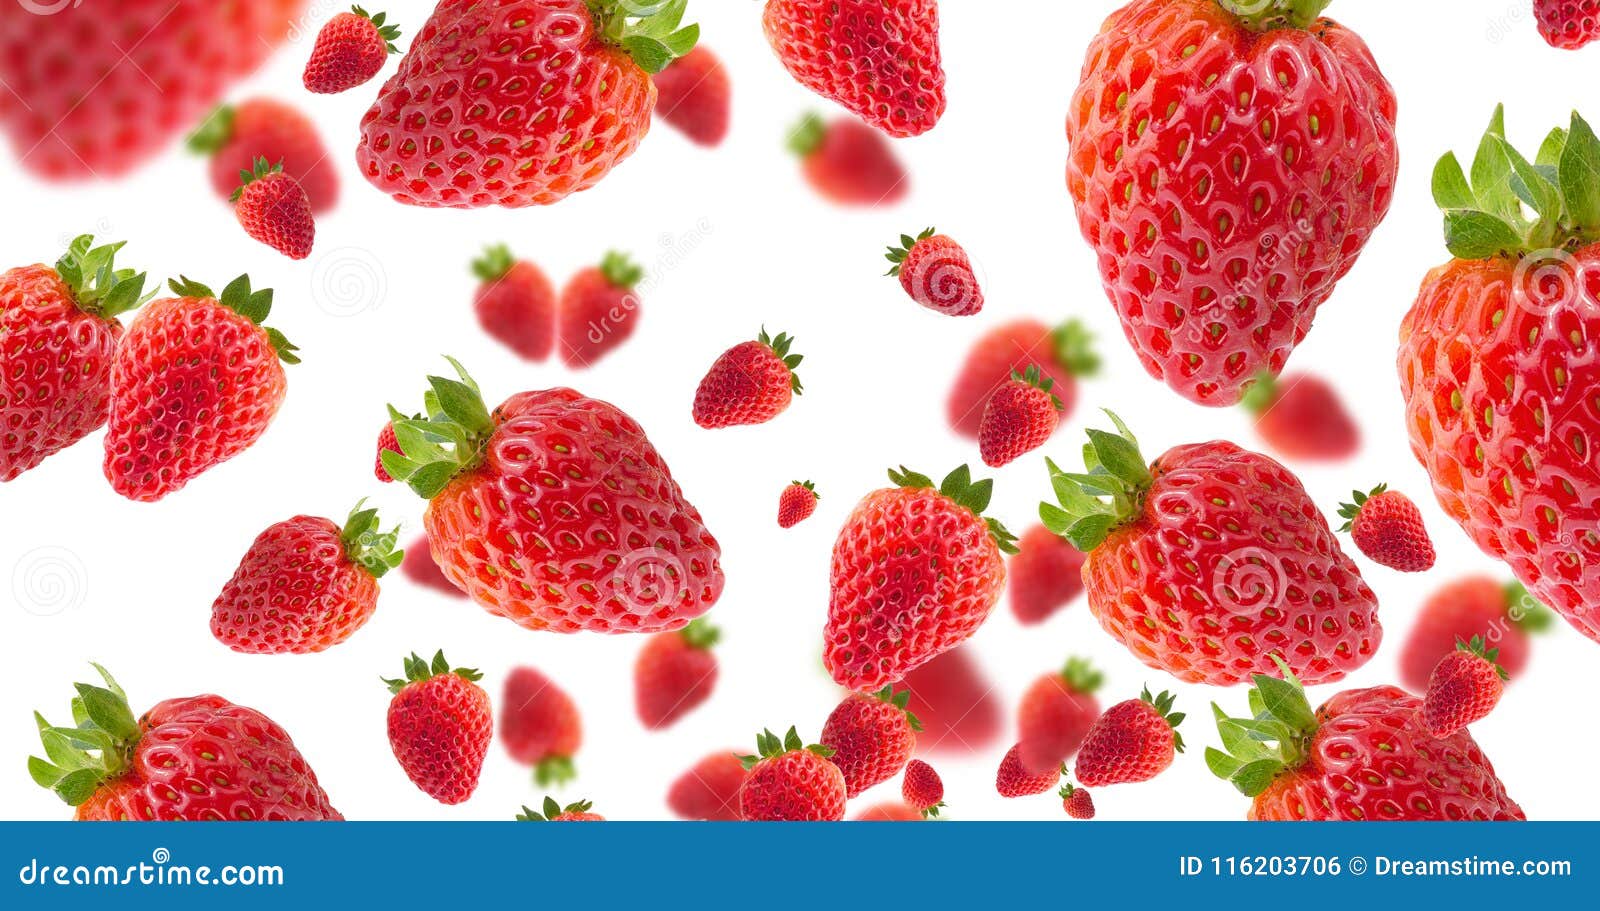 strawberries with effect on white background for backgrounds